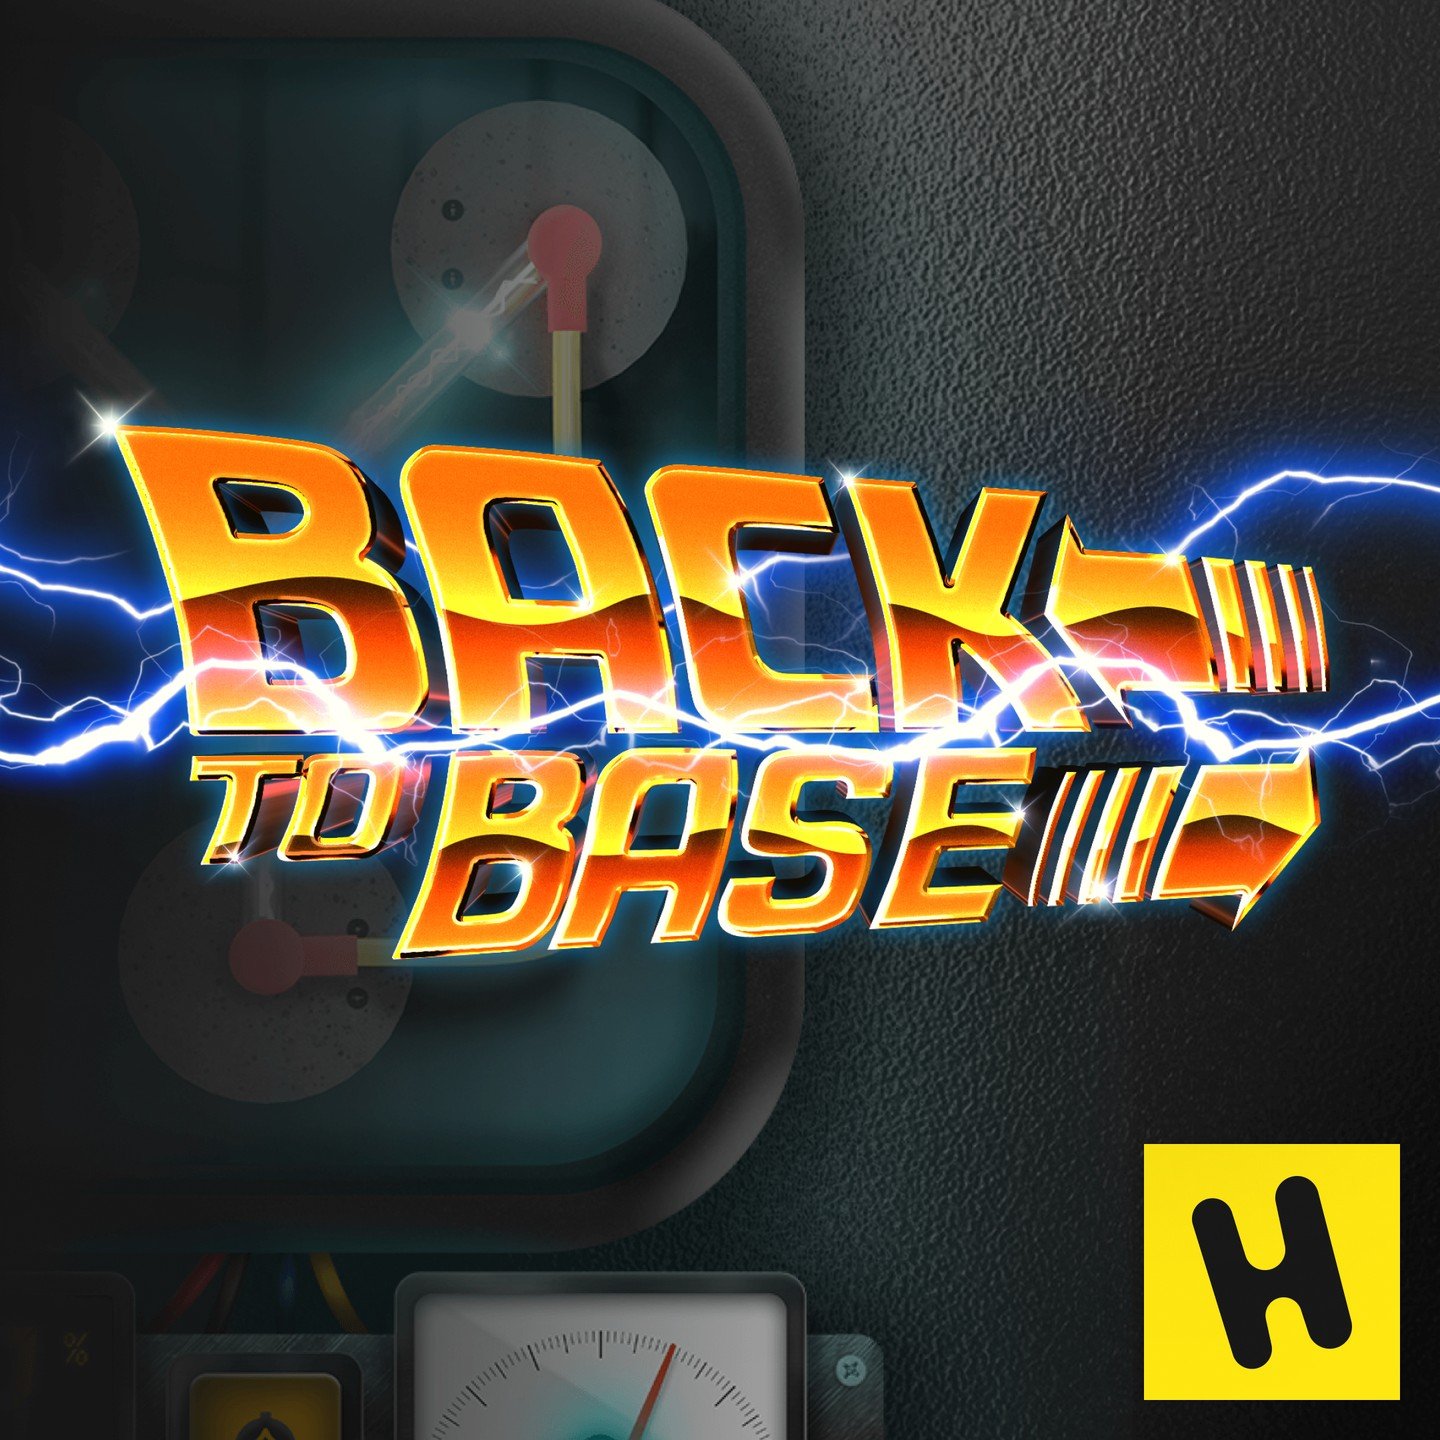 Base Arcade is back next Saturday for a 3-day, bumper bank holiday weekend extravaganza!

Fuel your retro action by grabbing a refreshing Hoptimistic Brew (Tropical Thunder or Flux) at the Oh Yeah bar while you smash your top scores on the arcades an